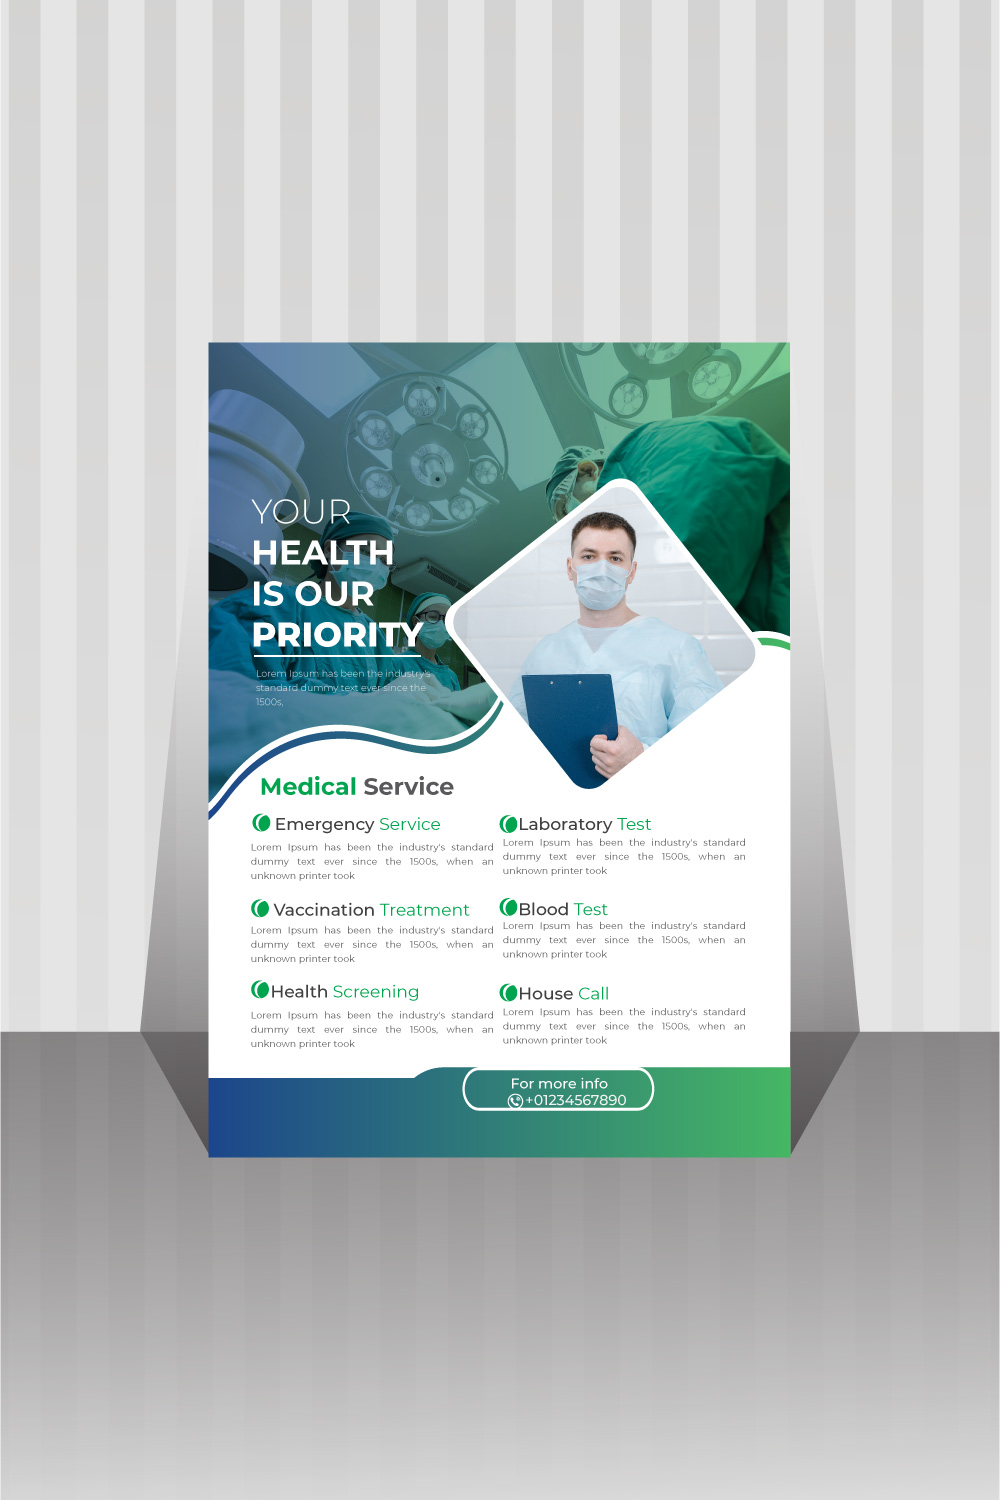 Healthcare flyer image with great design